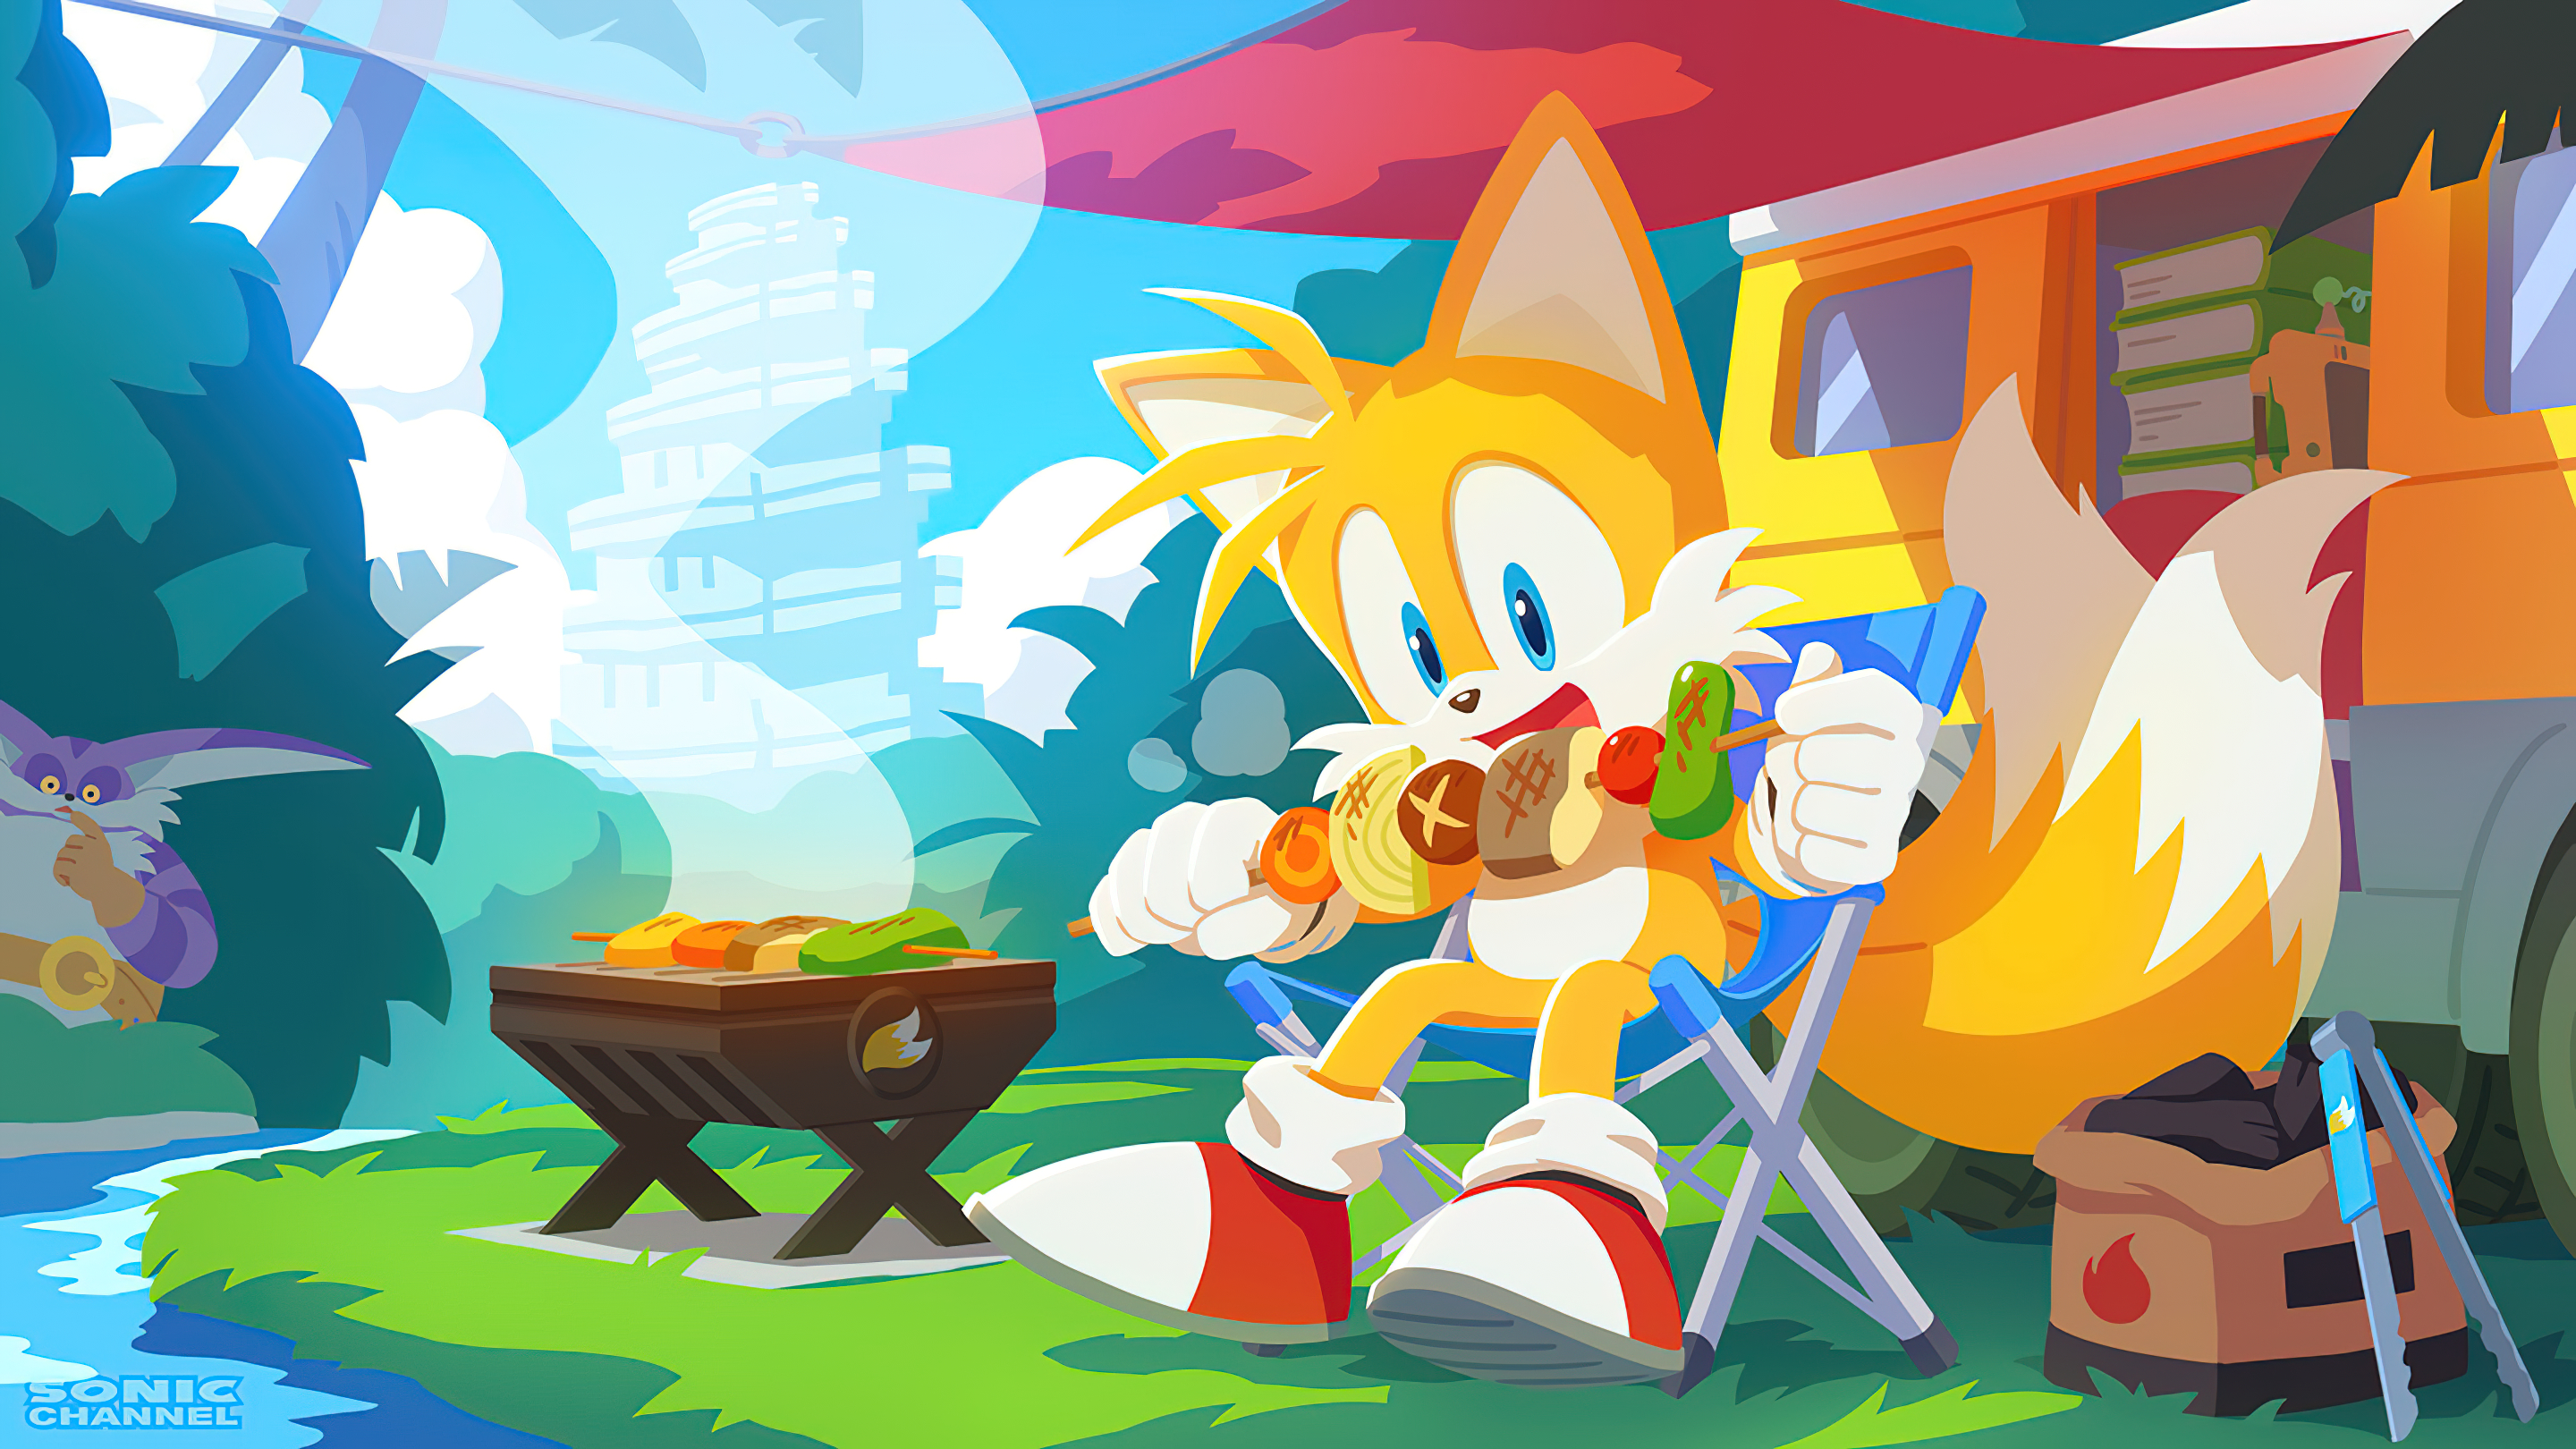 General 2880x1620 Tails (character) Yui Karasuno fox Sega video game art comic art Sonic the Hedgehog Sonic barbecue barbecue grill barbed wire coal video game characters Big the Cat Anthro artwork video games